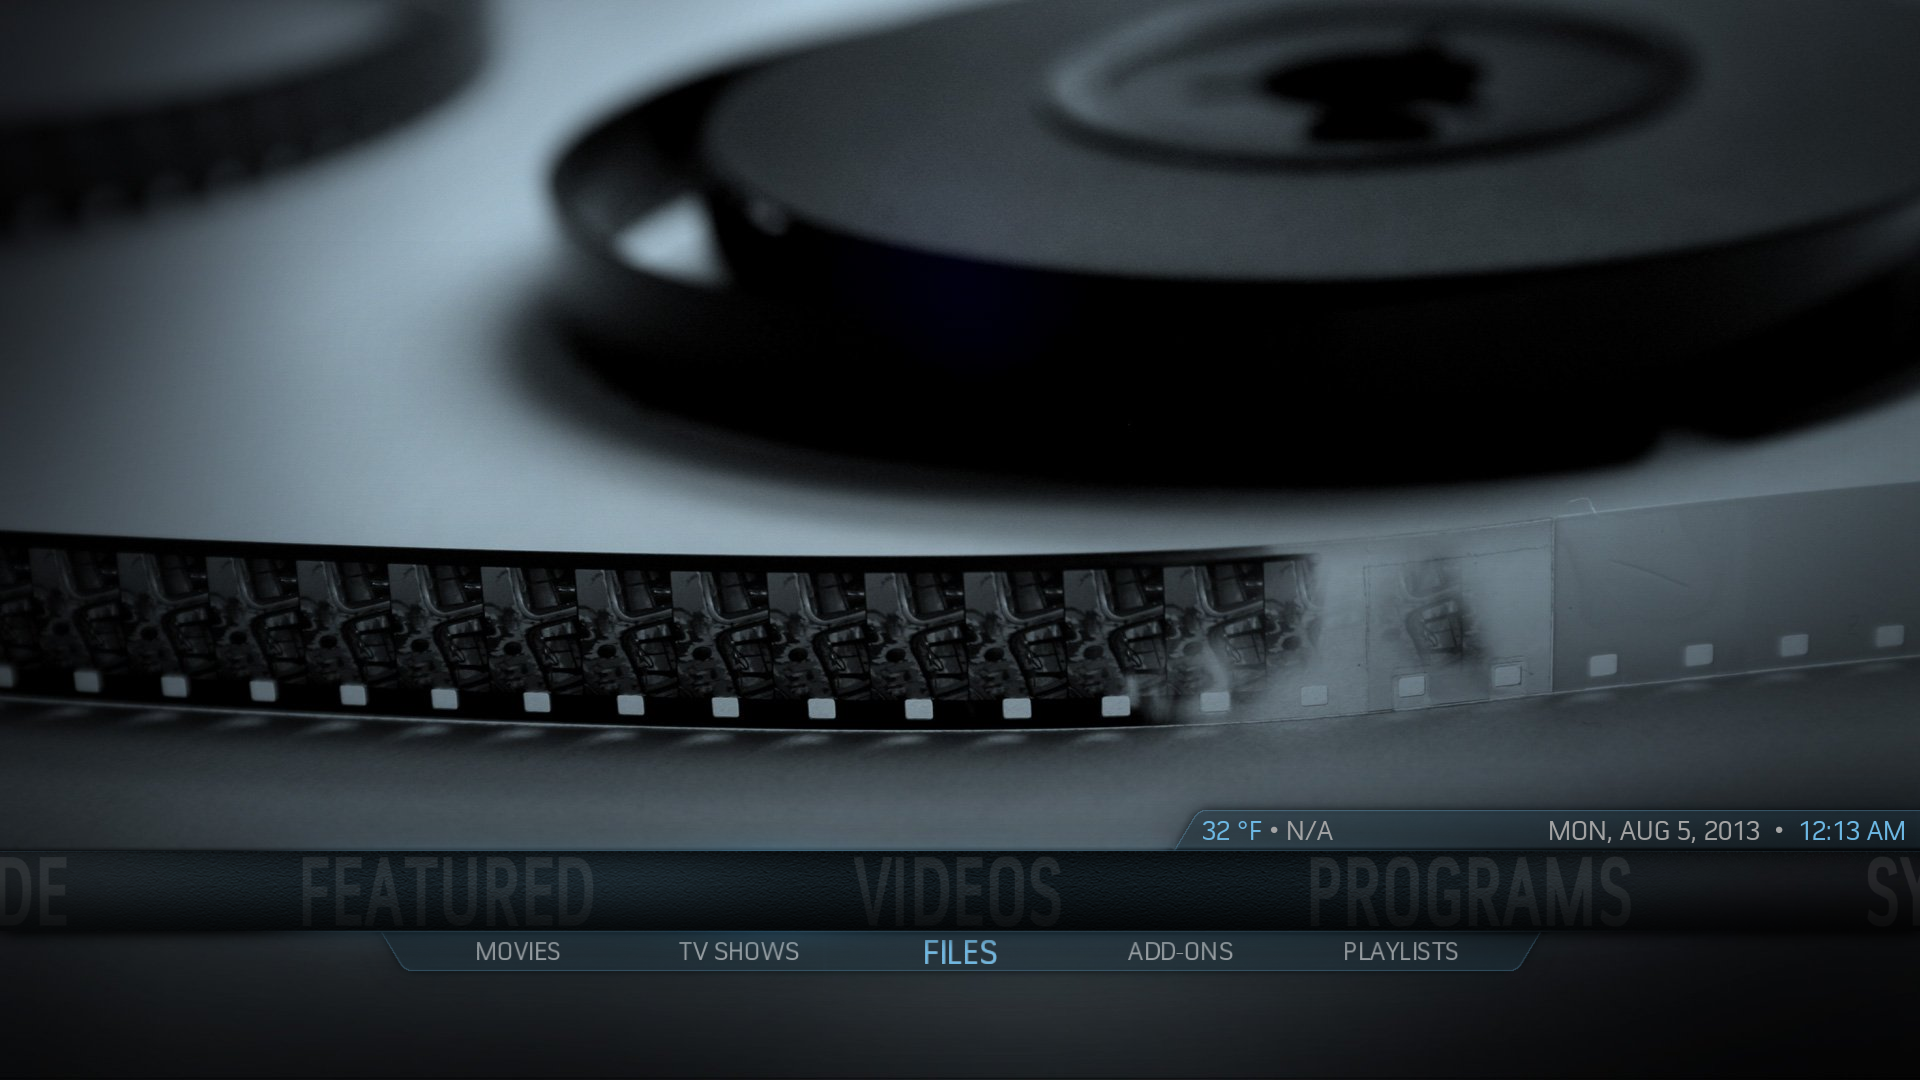 Step 1: In XBMC Go to Videos -> Files.